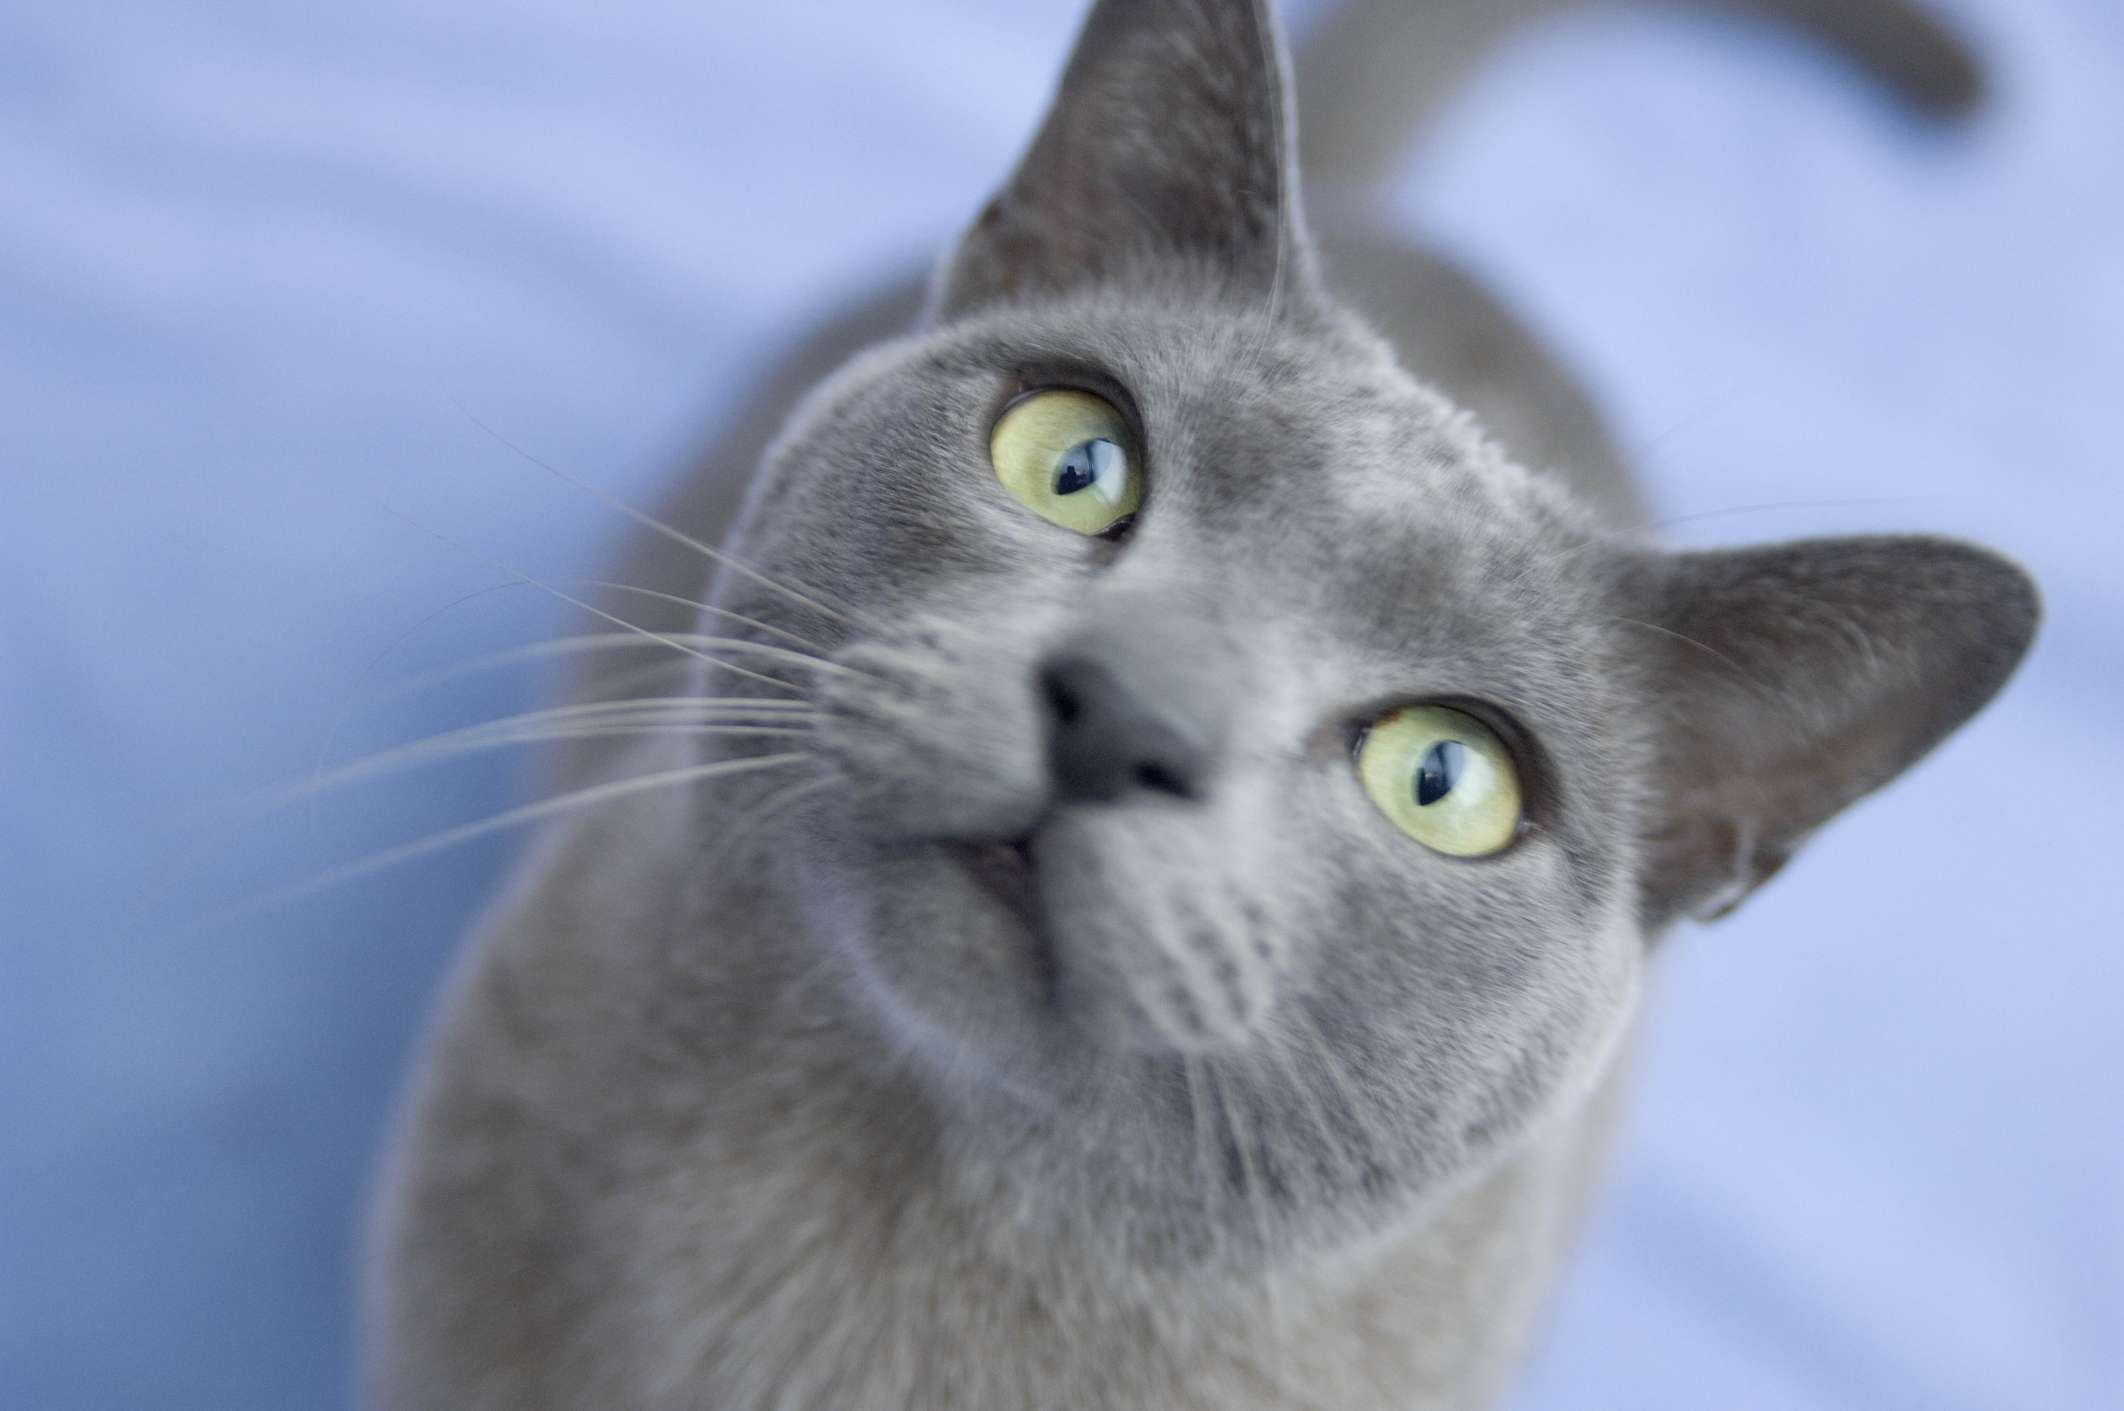 A Burmese cat looking into the camera.